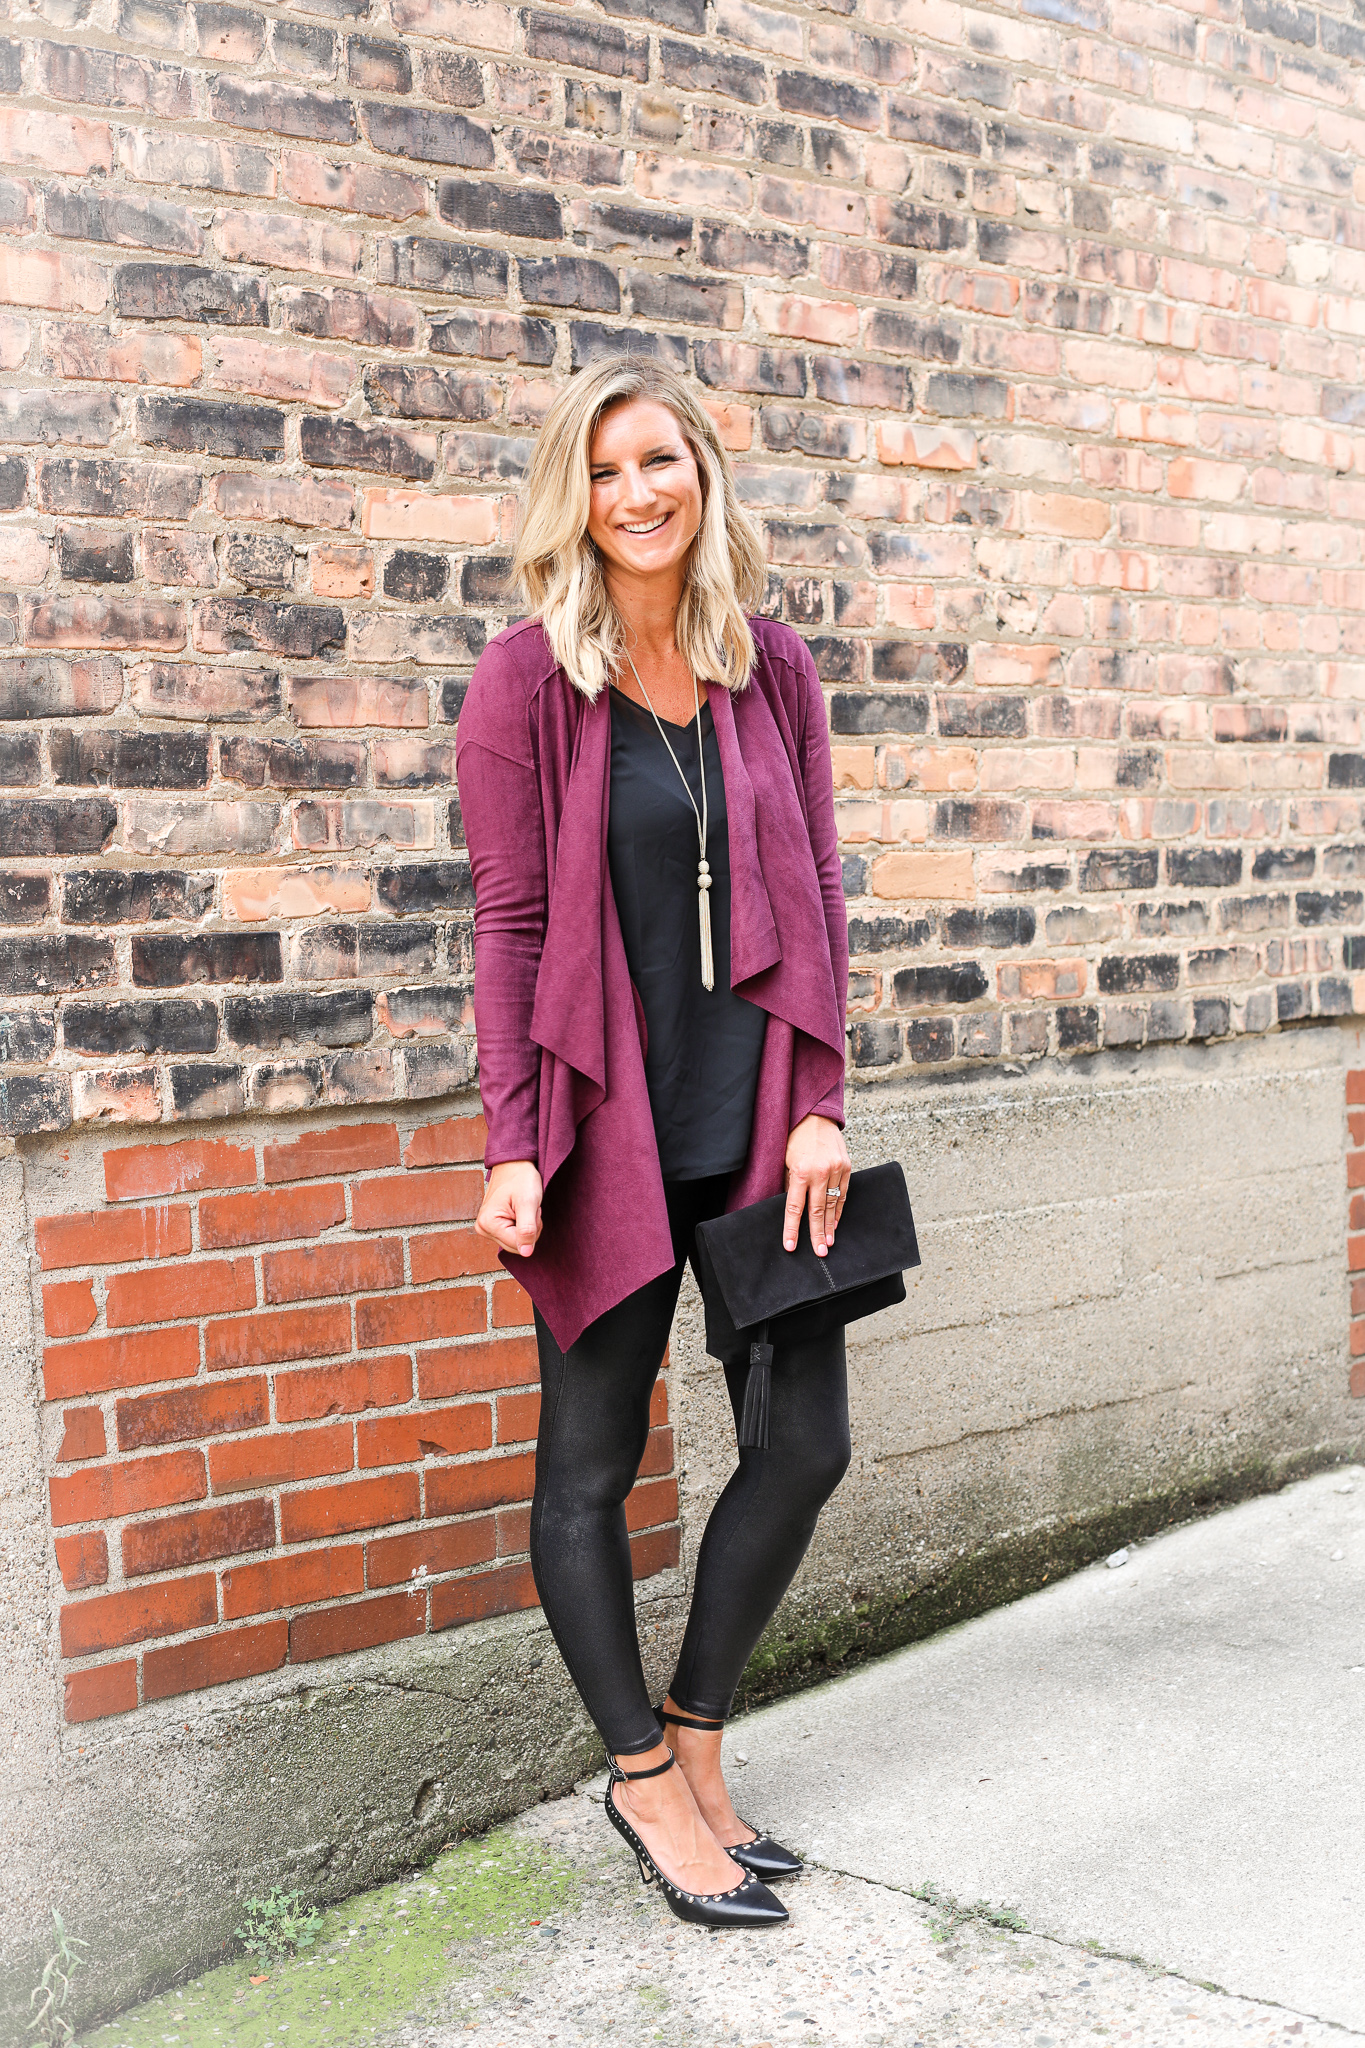 How To Style Faux Leather Leggings [3 Ways - Work, Casual, Date